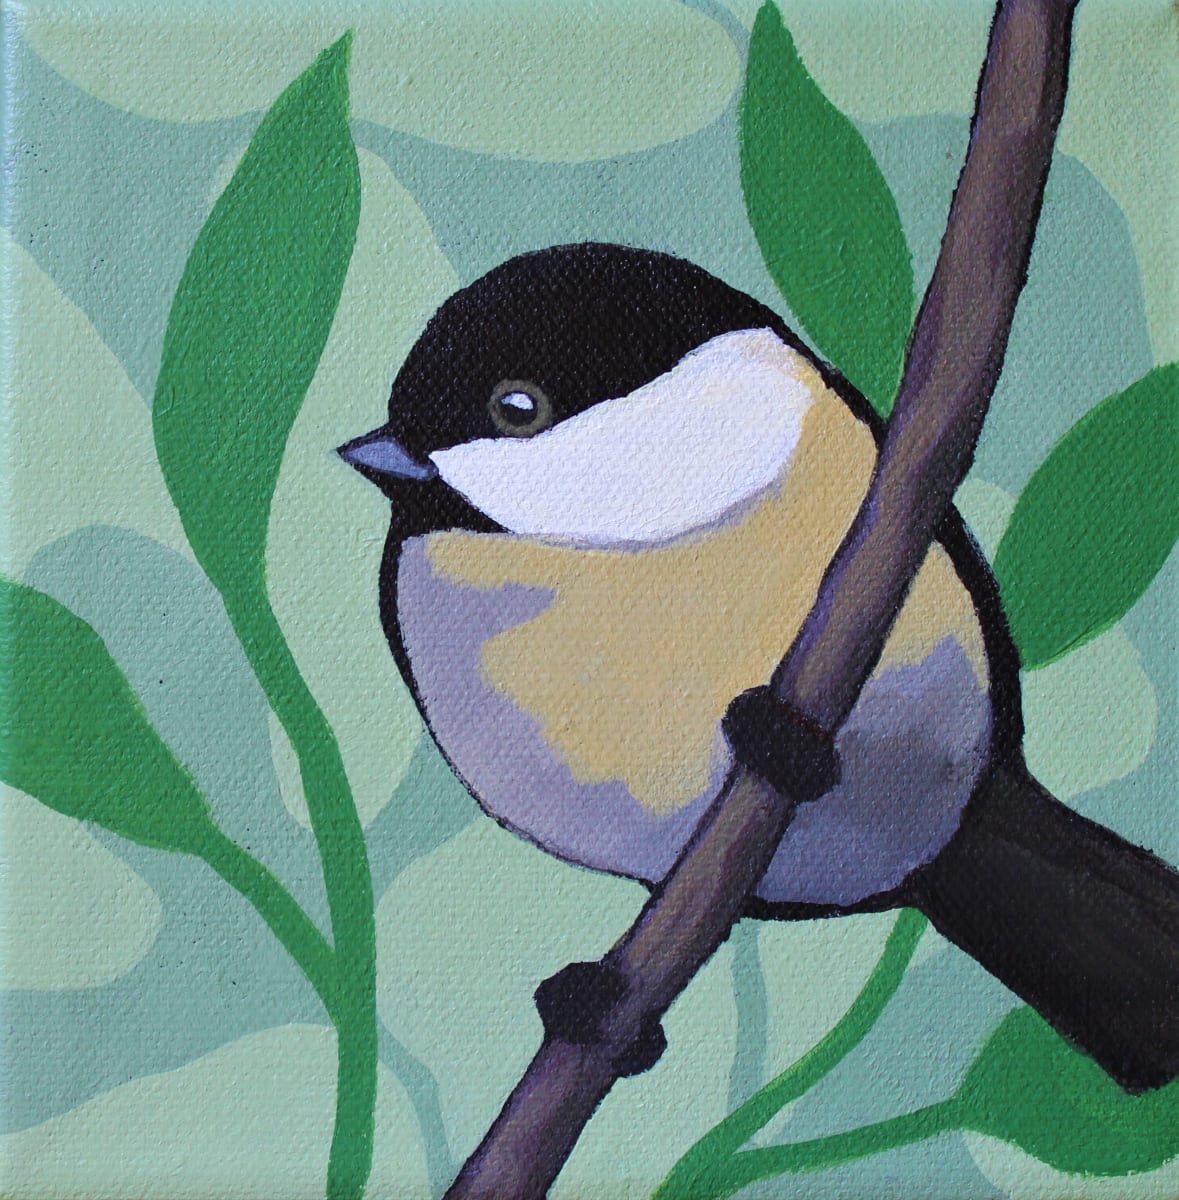 Another Chickadee by Jane Thuss  Image: A cute Chickadee among the leaves.